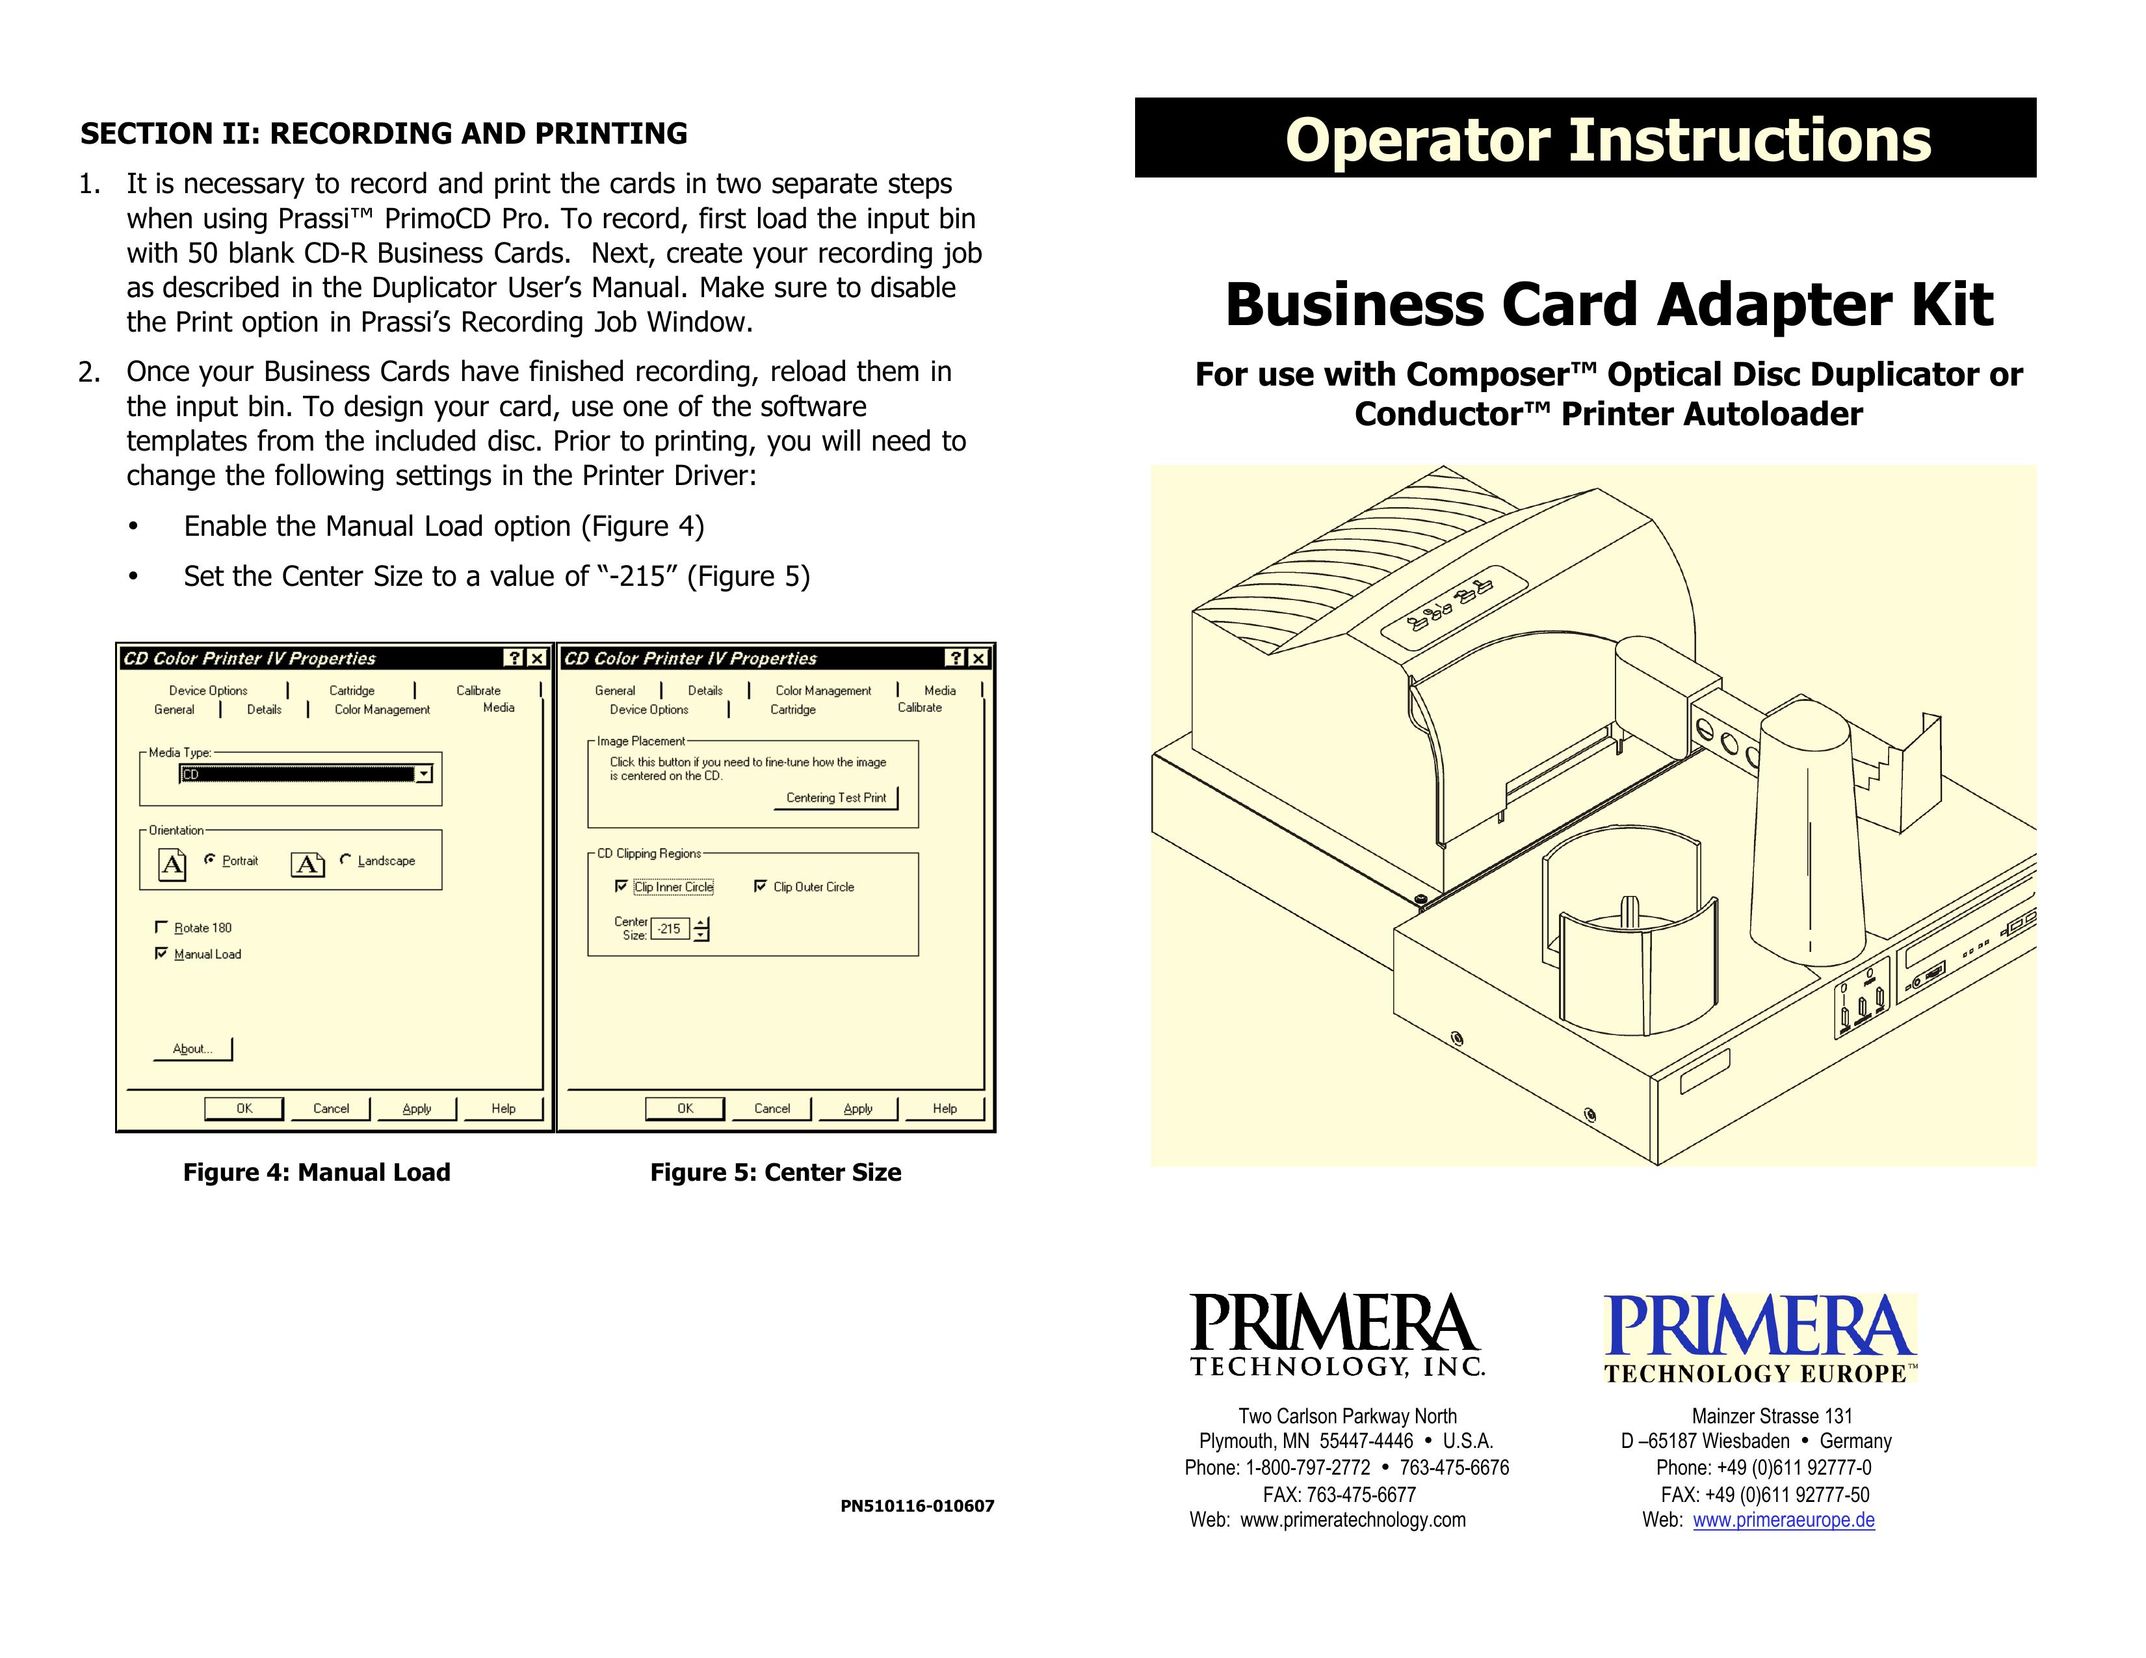 Primera Technology Business Card Adapter Kit Network Card User Manual